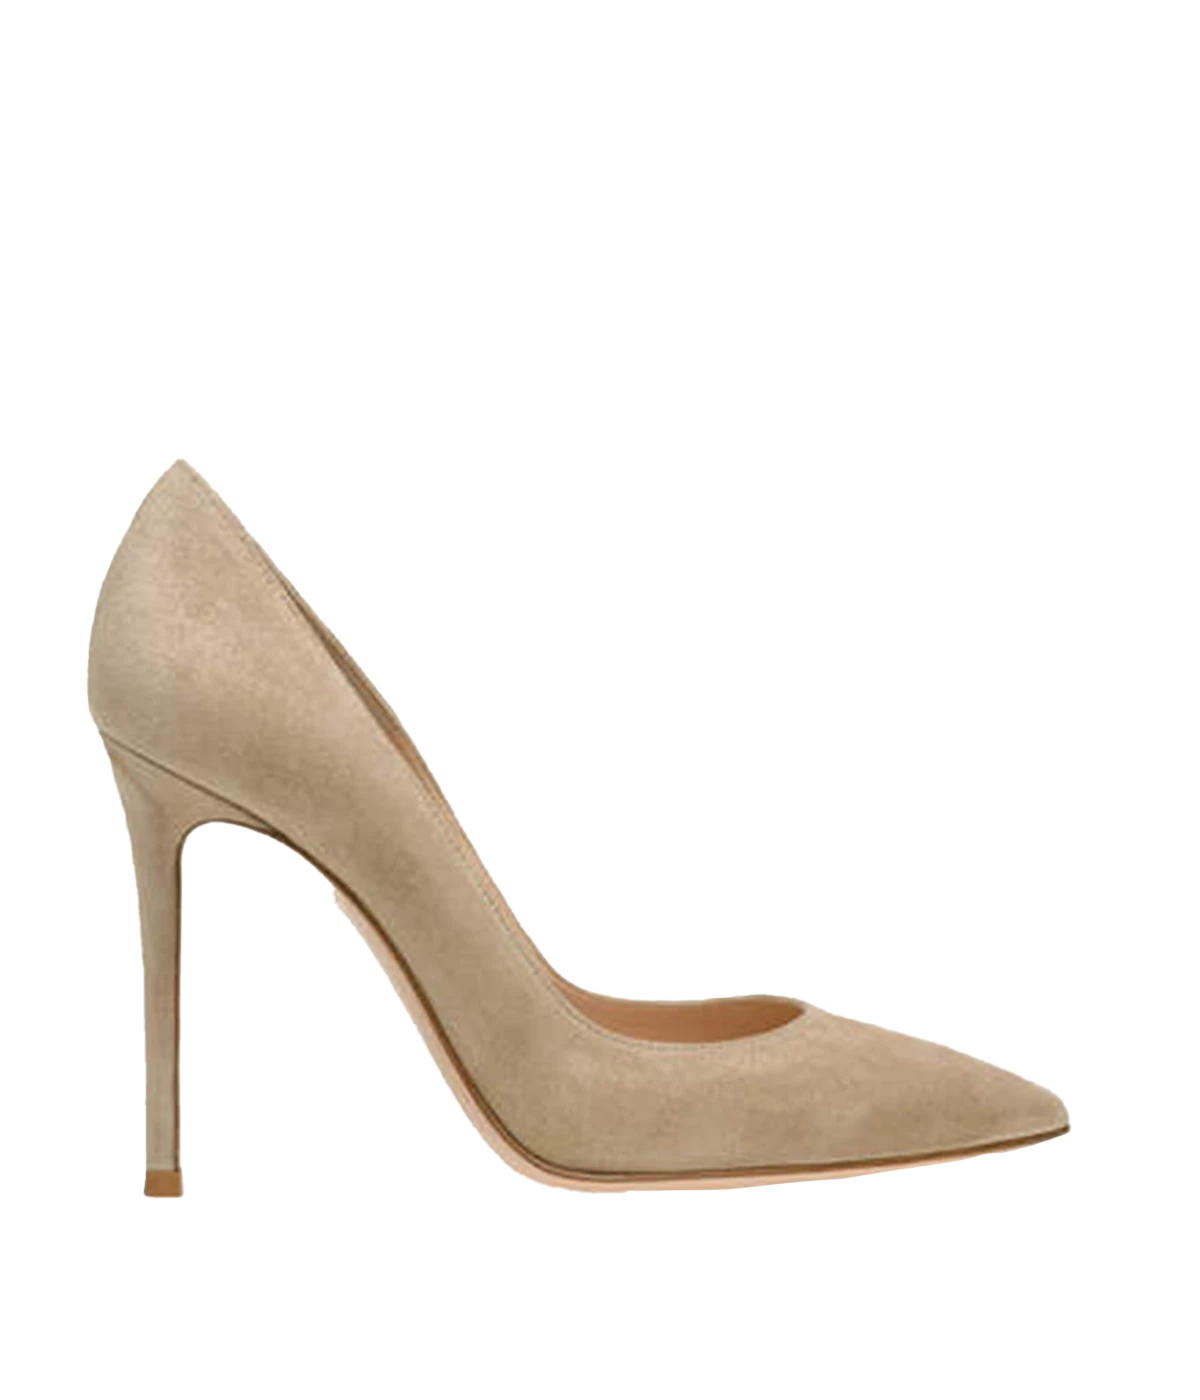 Image of a 105mm suede leather nude pump, featuring a pointed toe and beige protective base. 